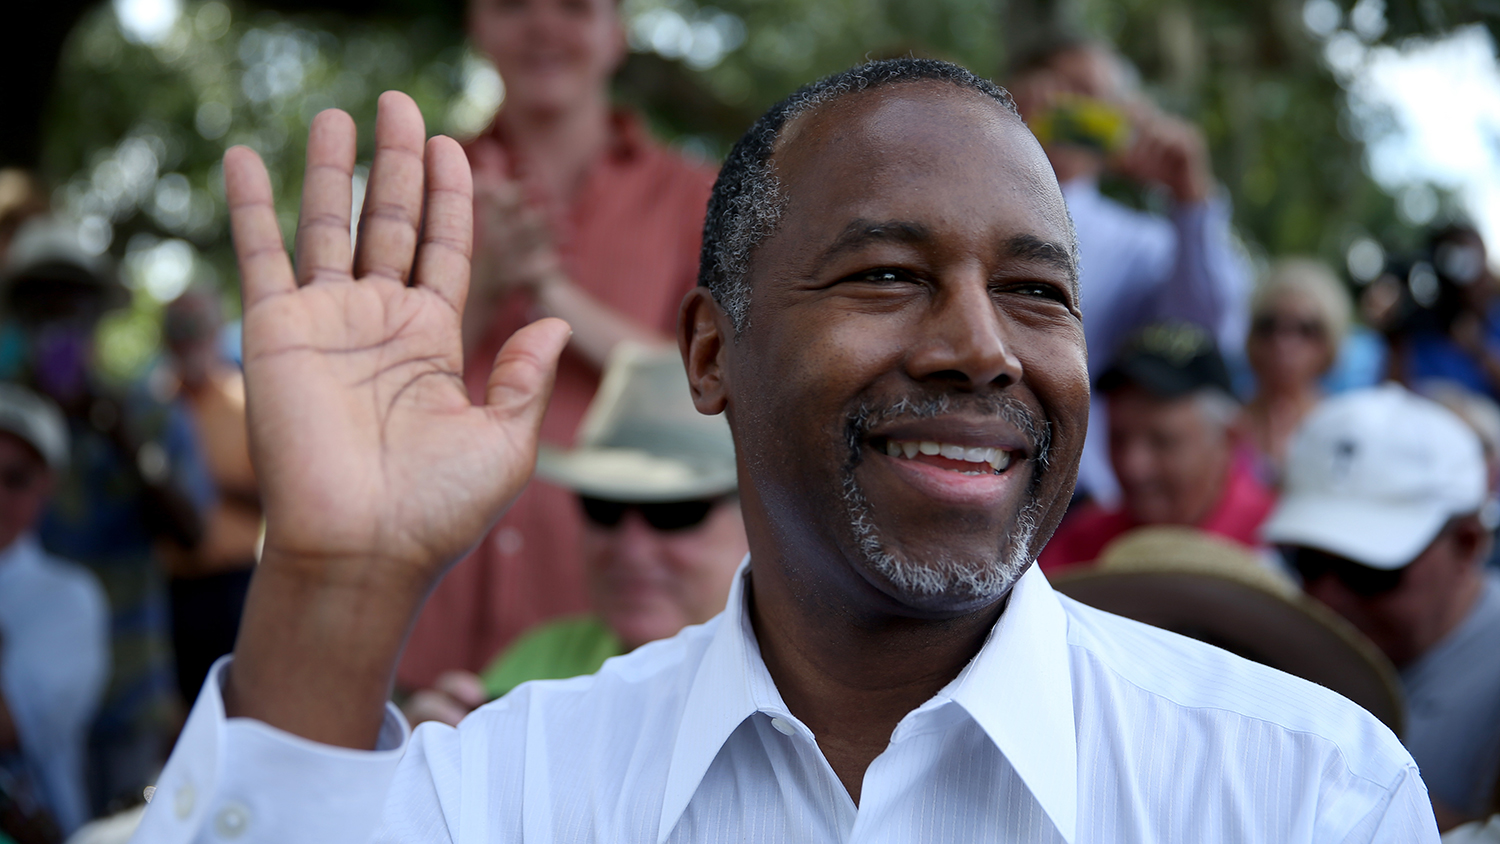 Republican presidential hopeful Ben Carson attends a campaign stop at the Mount Pleasant Farmers Market on May 26, 2015 in Mt Pleasant, South Carolina.
